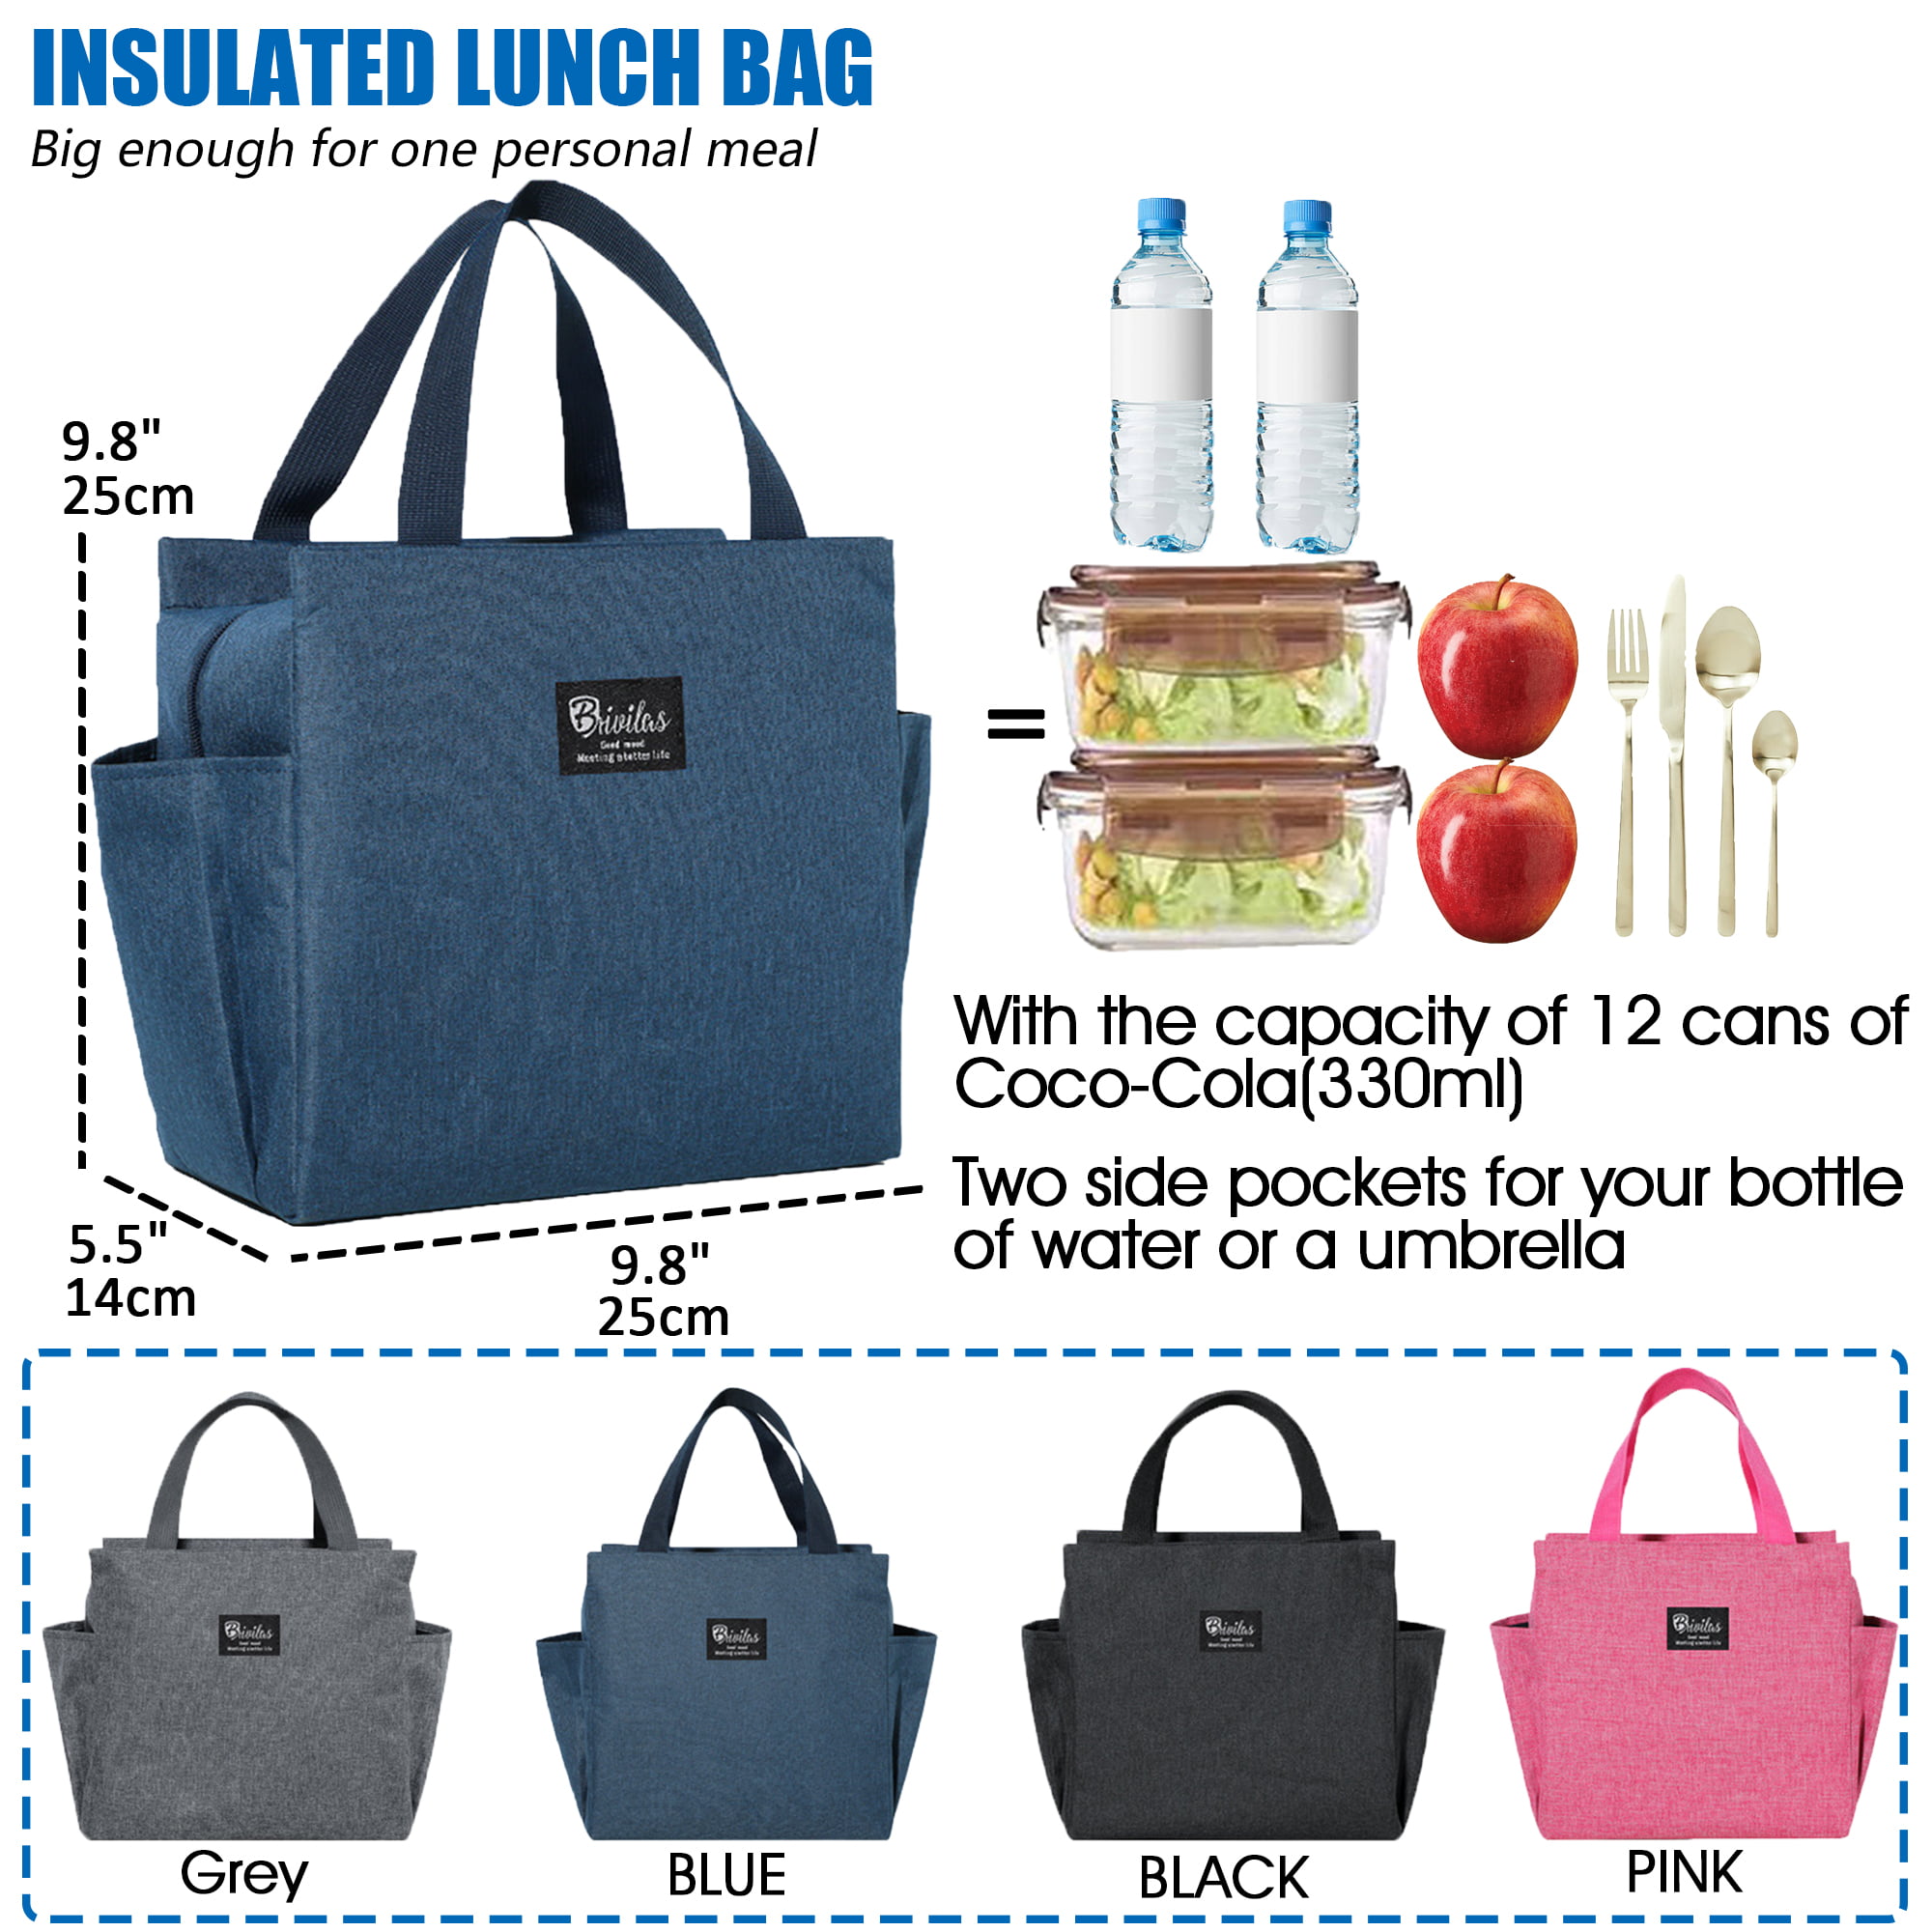 Lunch Bag, Insulated Tote Lunch Box Bags, Reusable Leakproof Lunch Container for Women, Men, Kid, Freezable Food Carries for Office School Picnic